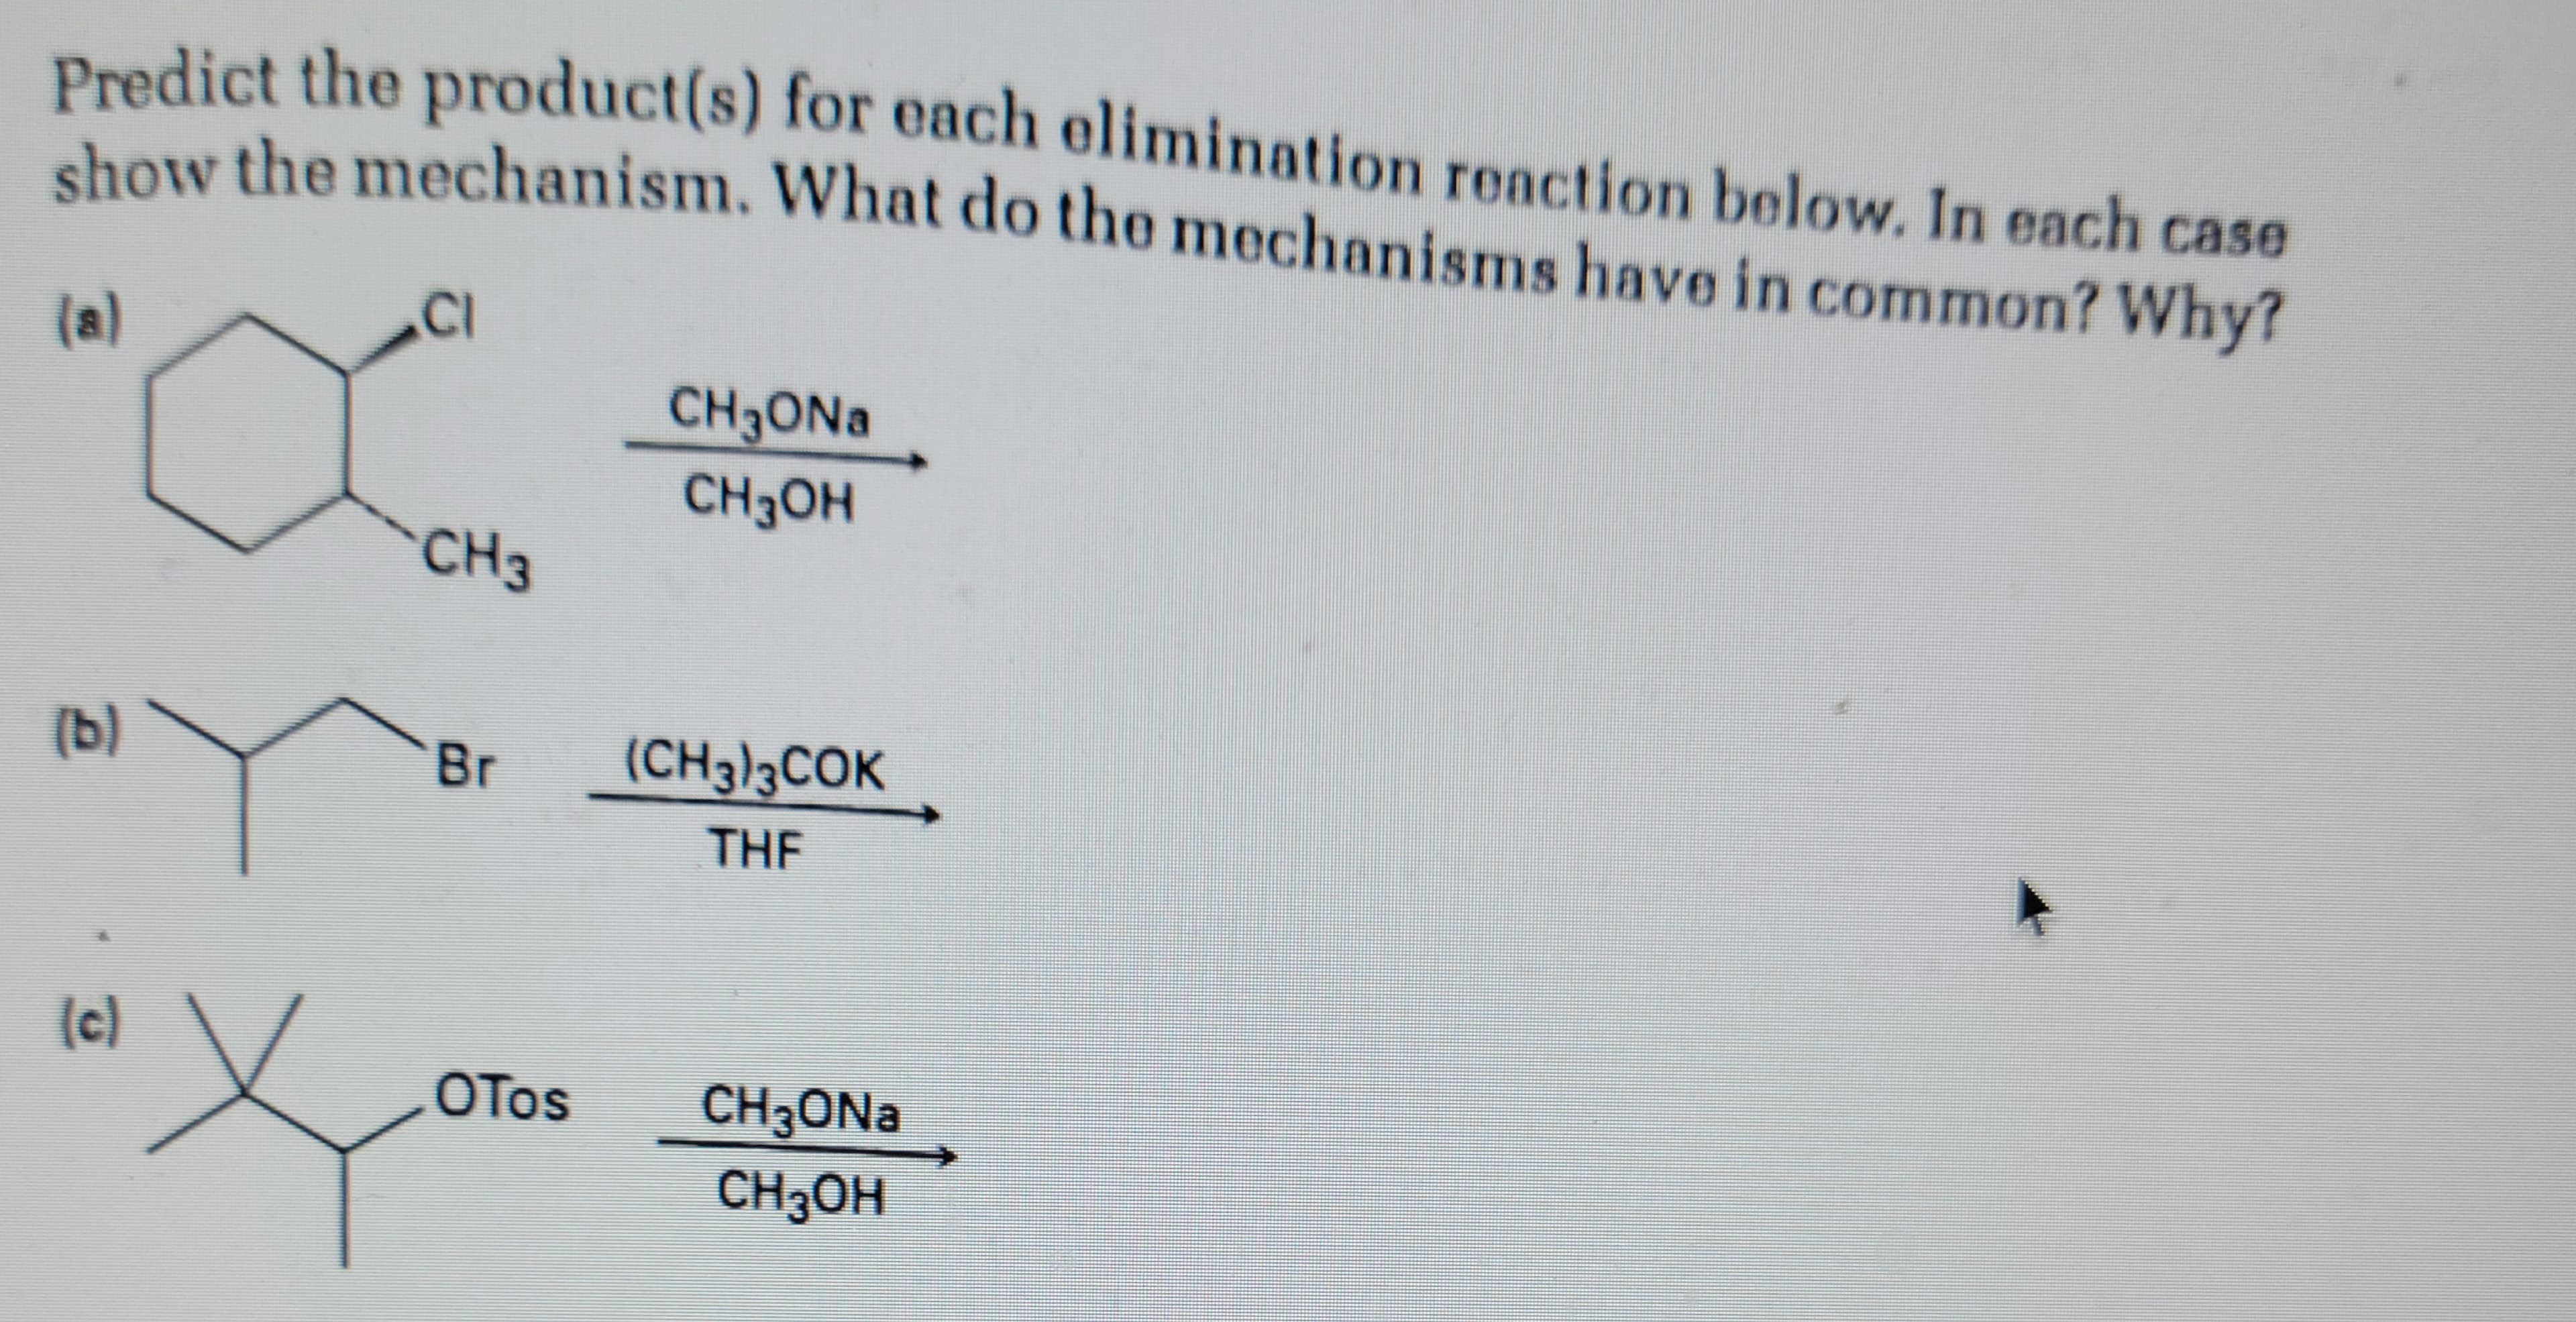 Predict the product(s) for each elimination reaction below. In each case
show the mechanism. What do the mechanisms have in common? Why?
(b)
(c)
CI
CH3
CH3ONa
CH3OH
Br (CH3)3COK
THE
x
OTos CH3ONa
CH³OH